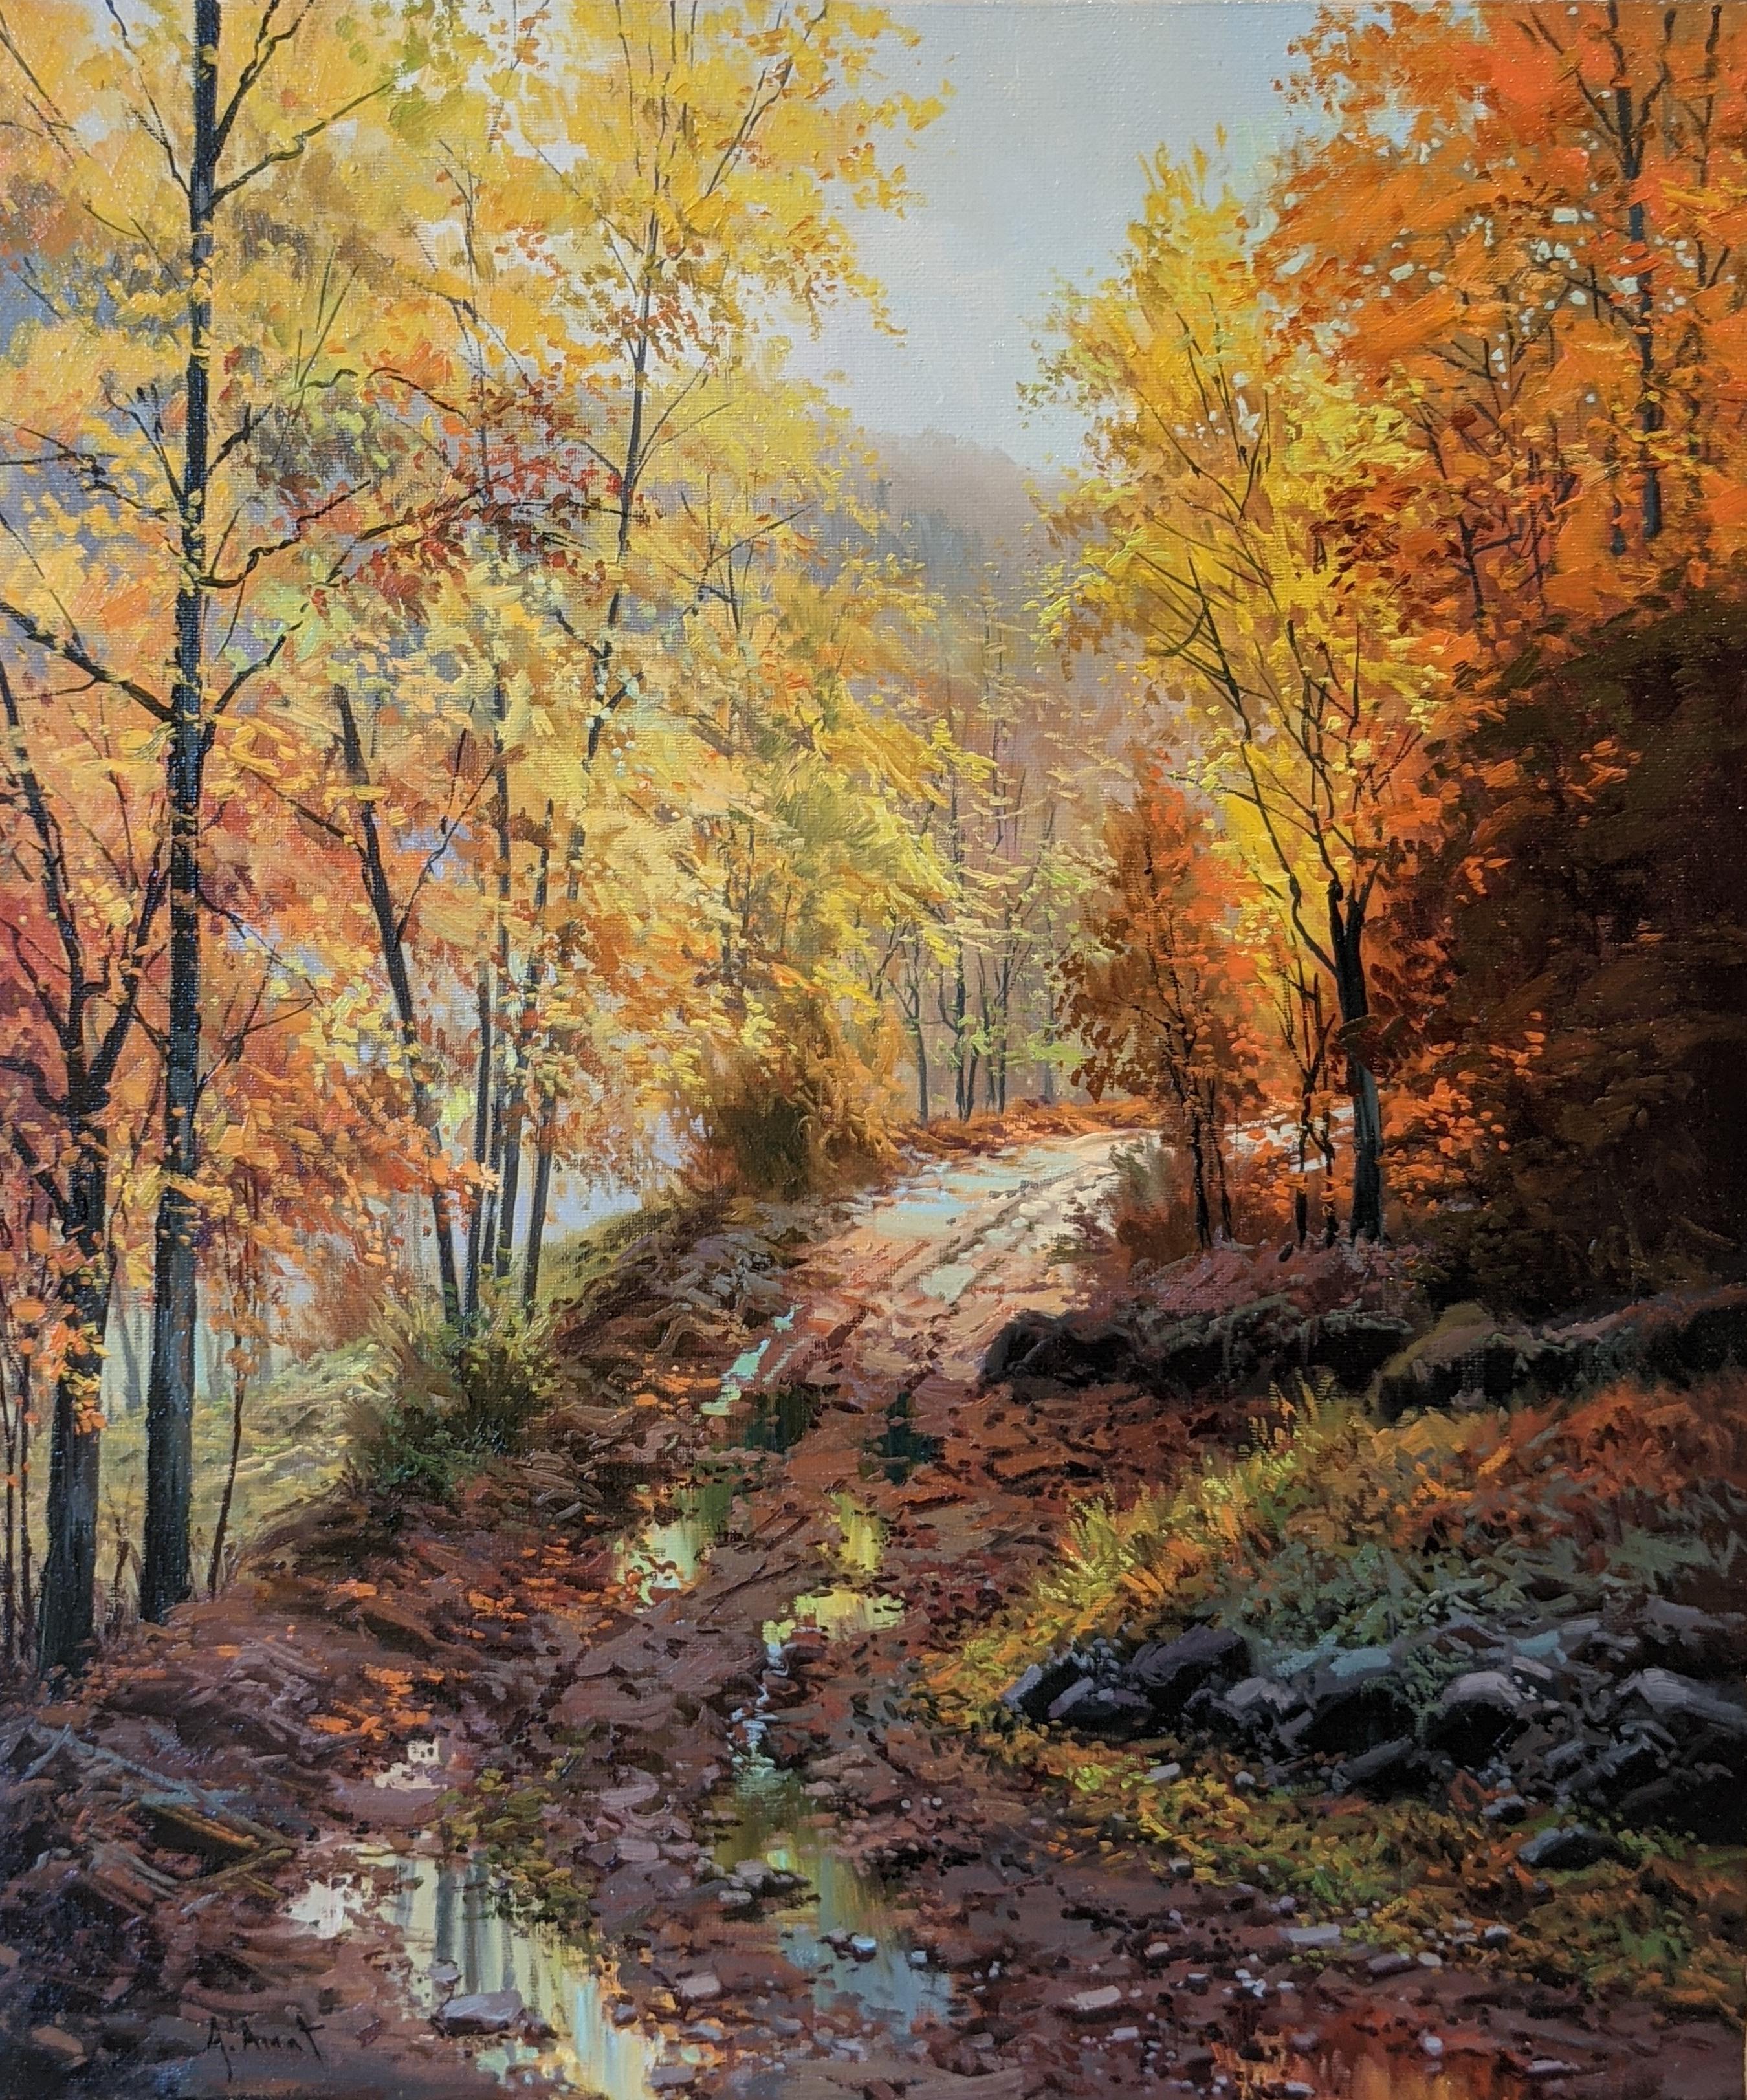 'Autumn Woodland' is a beautiful autumnal contemporary landscape painting of Yellow & Orange trees. The fine detail brings this work to life.
Amat was born in the hot arid climate of Southern Spain but fell in love with lush landscape of woodland